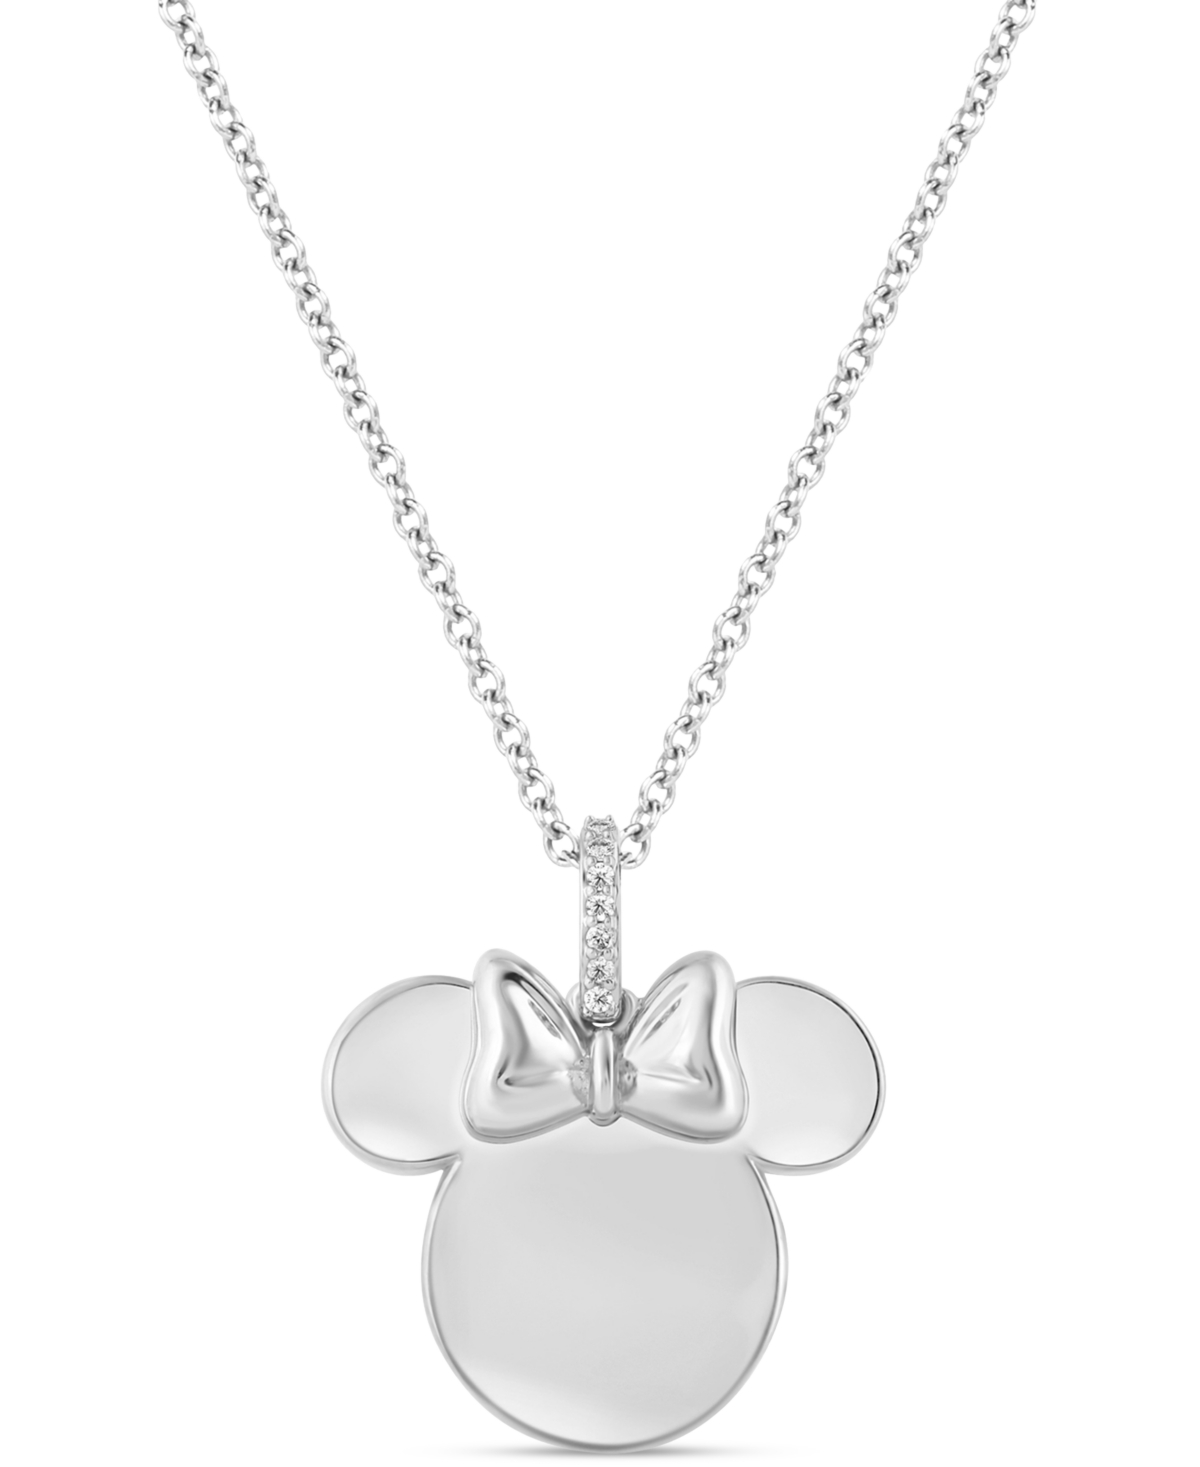 Shop Wonder Fine Jewelry Diamond Accent Minnie Mouse Silhouette Pendant Necklace In Sterling Silver, 16" + 2" Extender